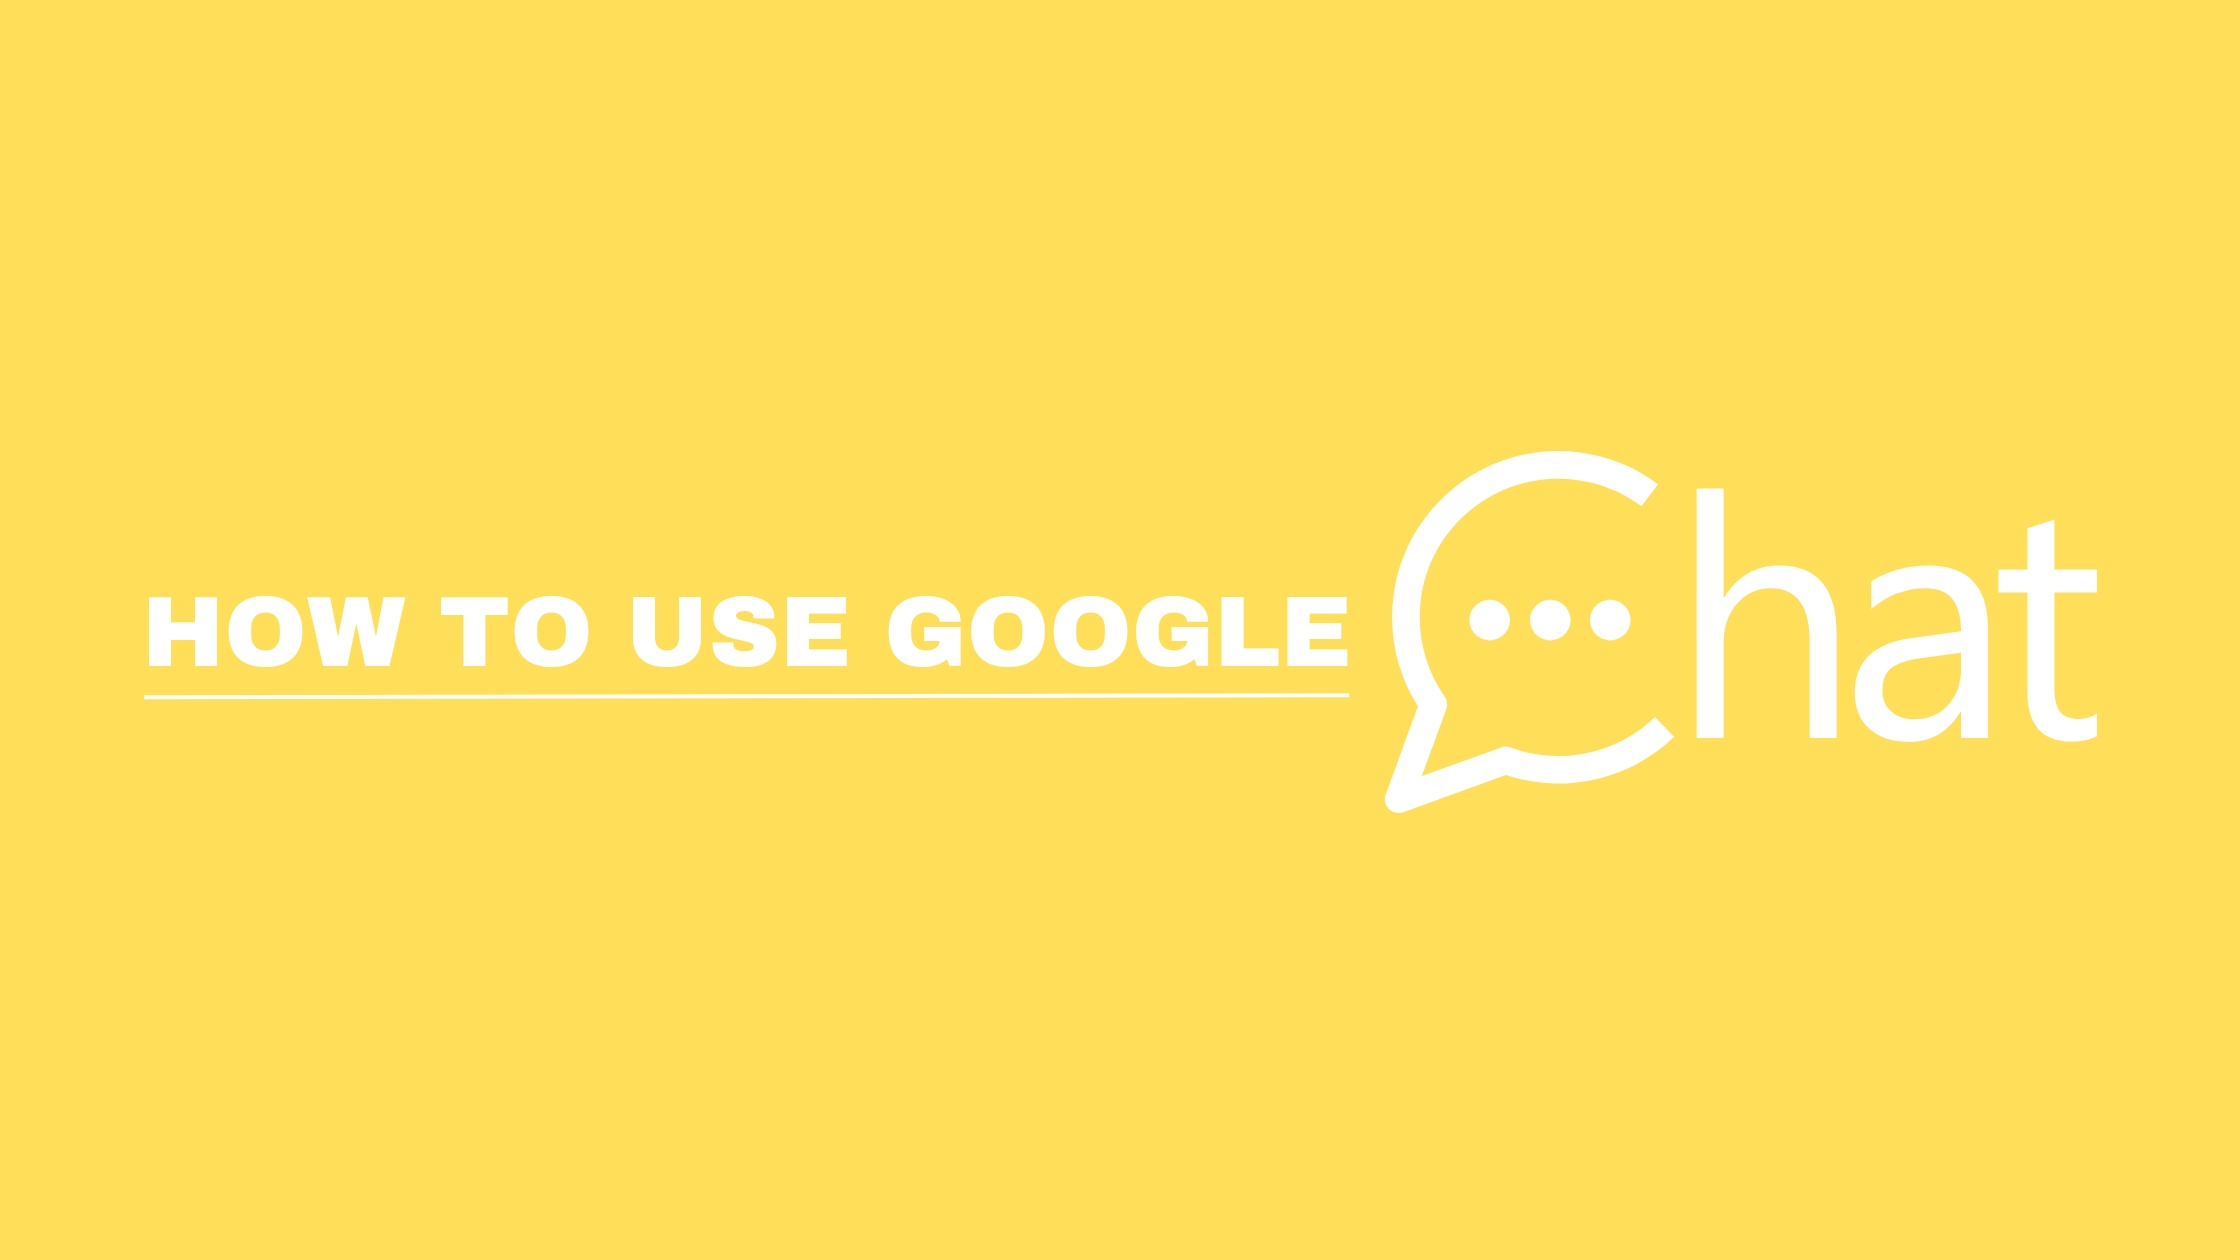 How to use Google chat